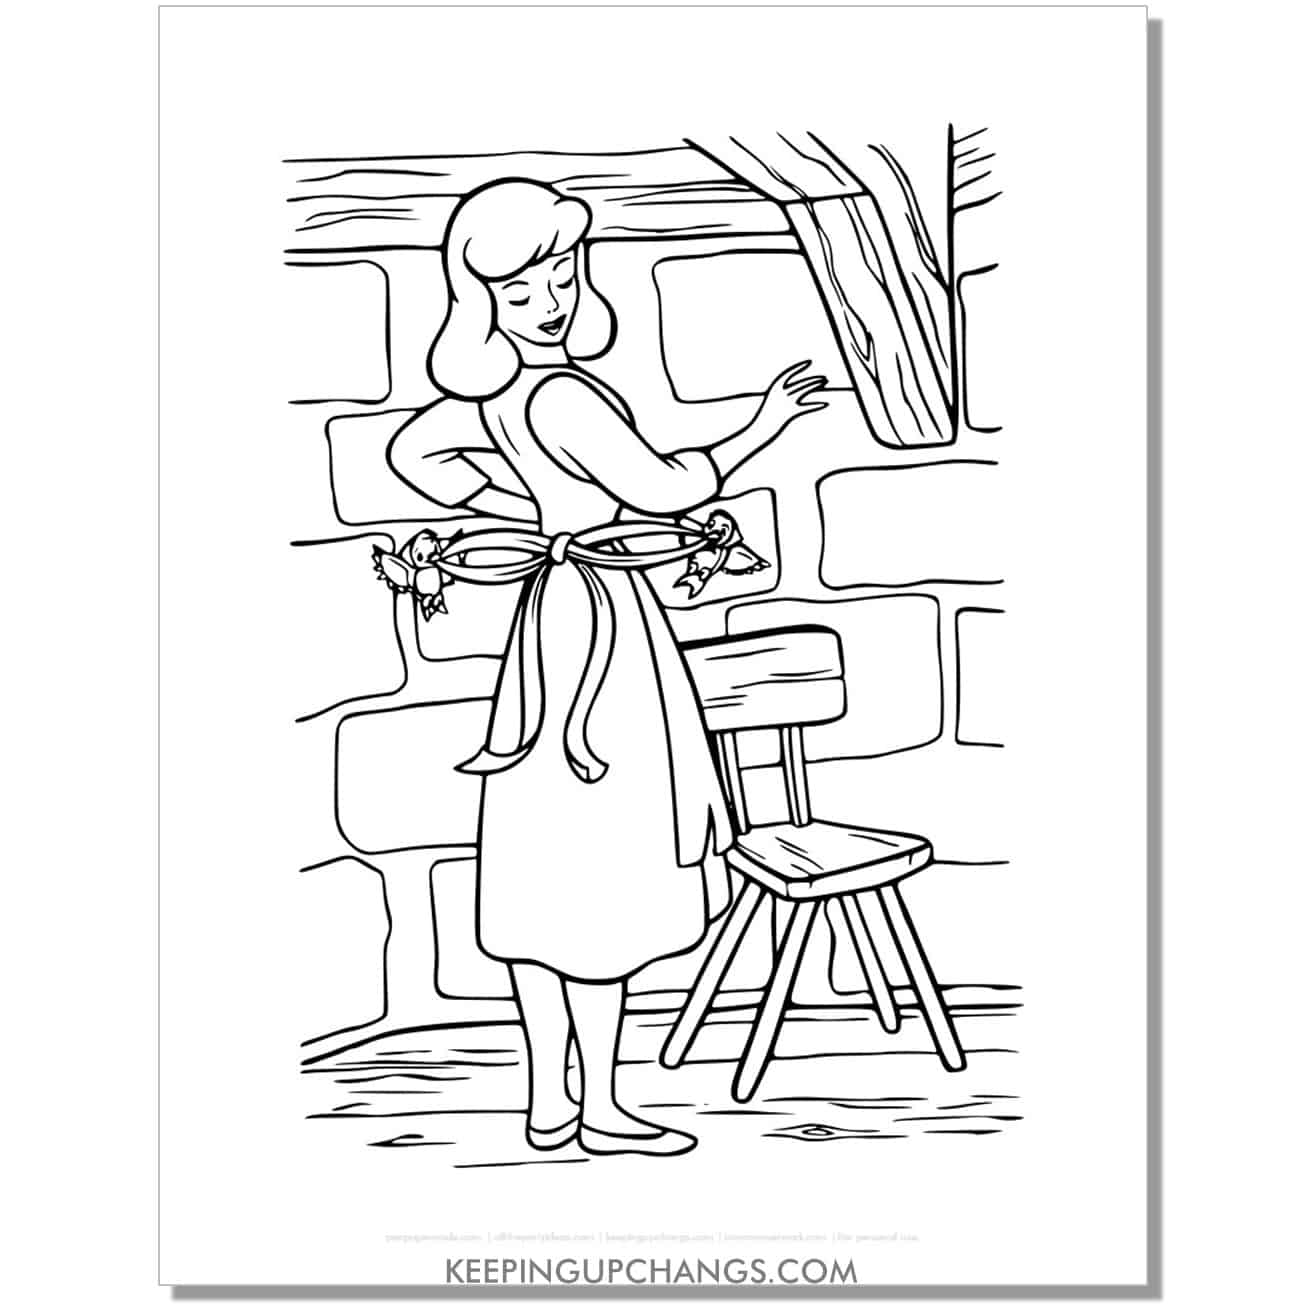 cinderella with bow tied in back by birds coloring page, sheet.